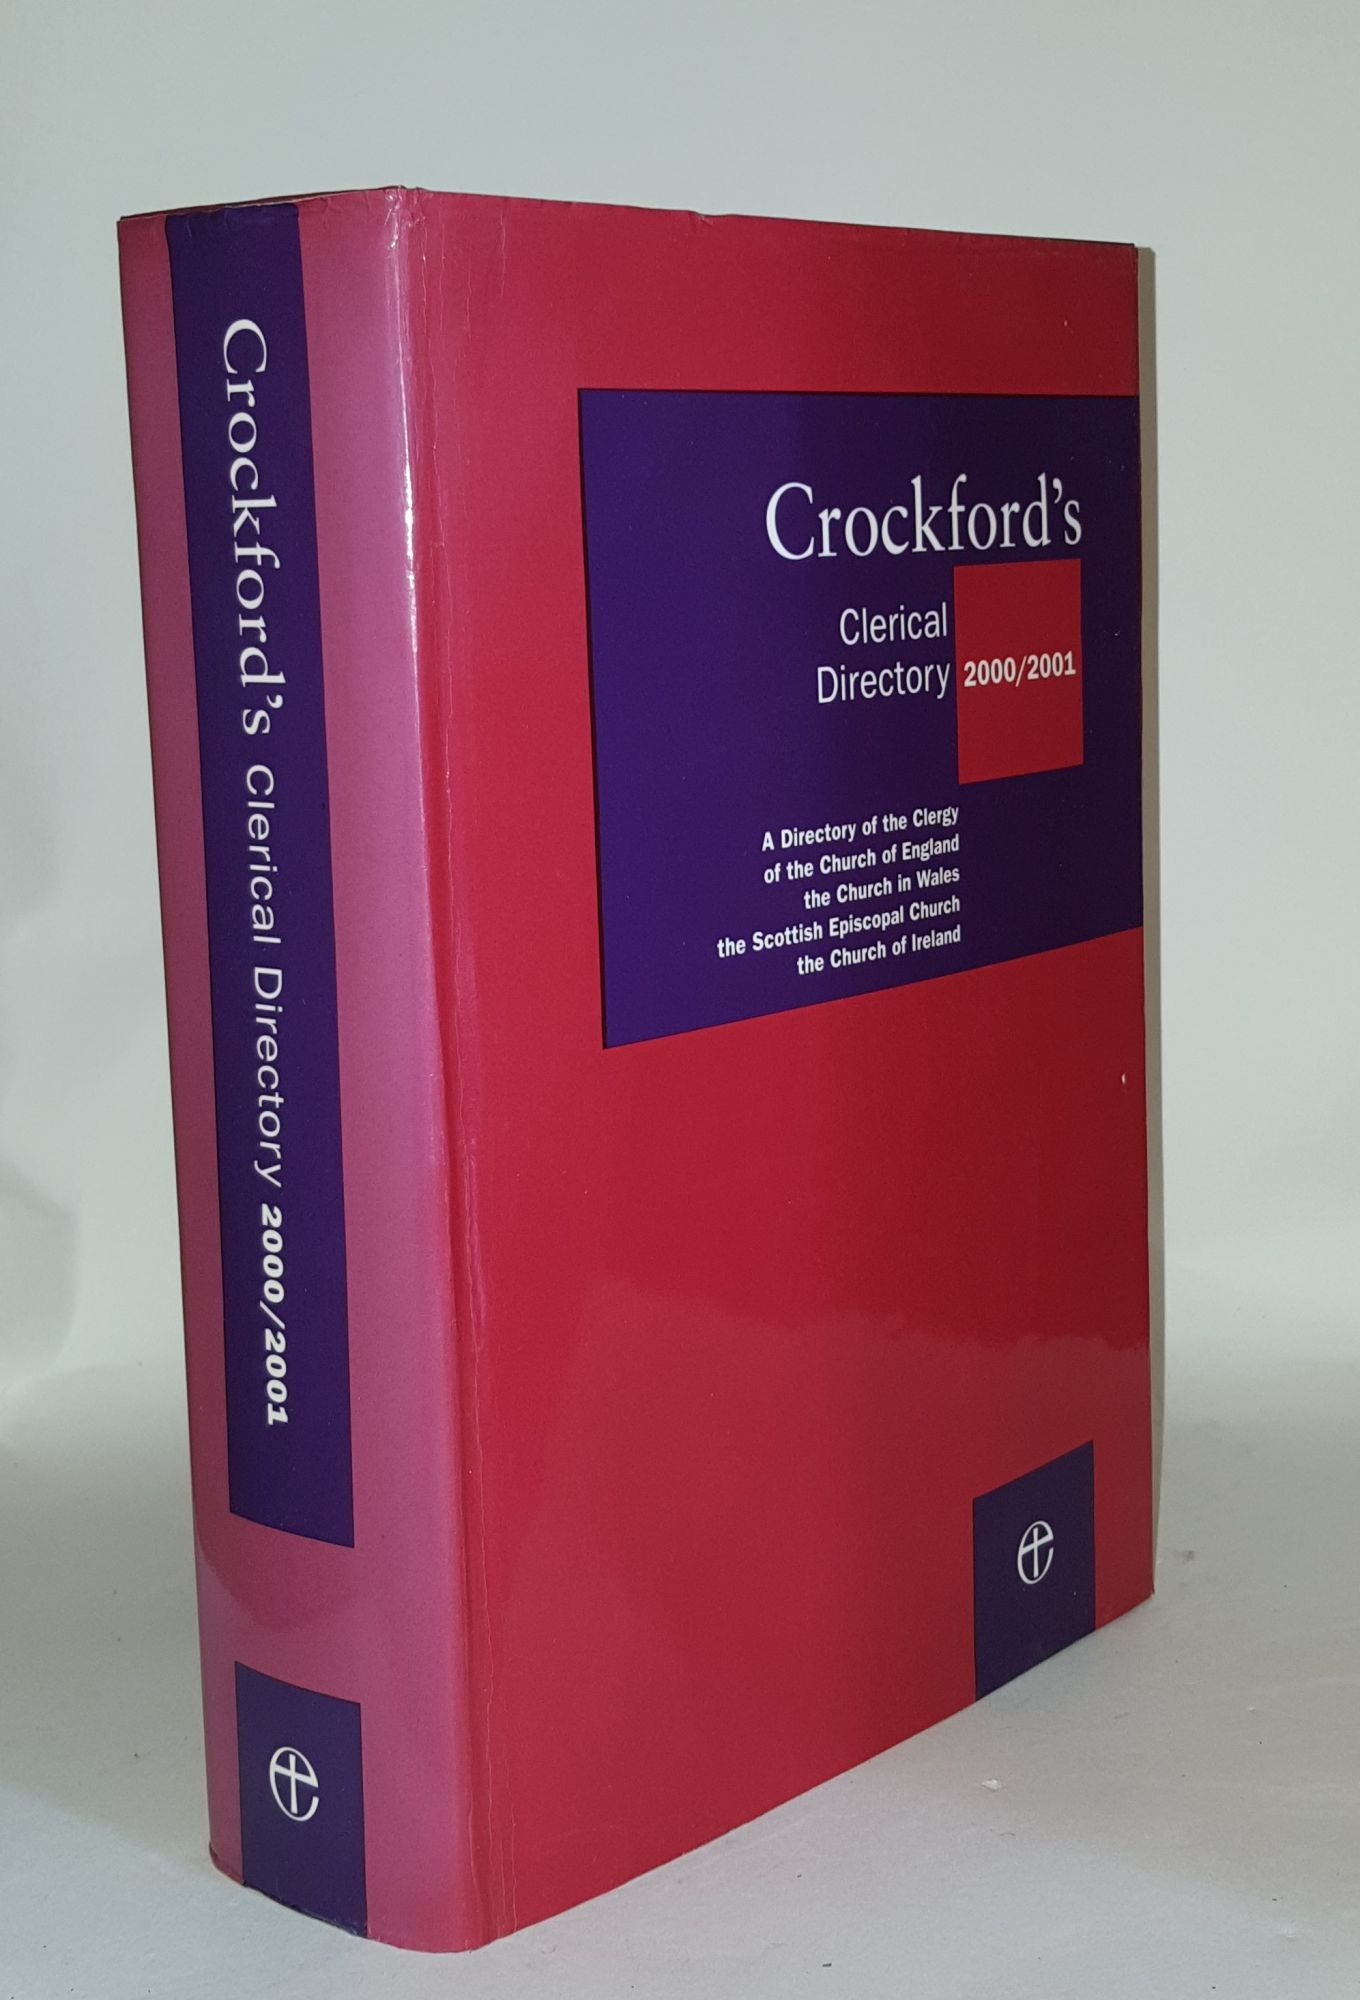 Anon - Crockford's Clerical Directory 2000-2001